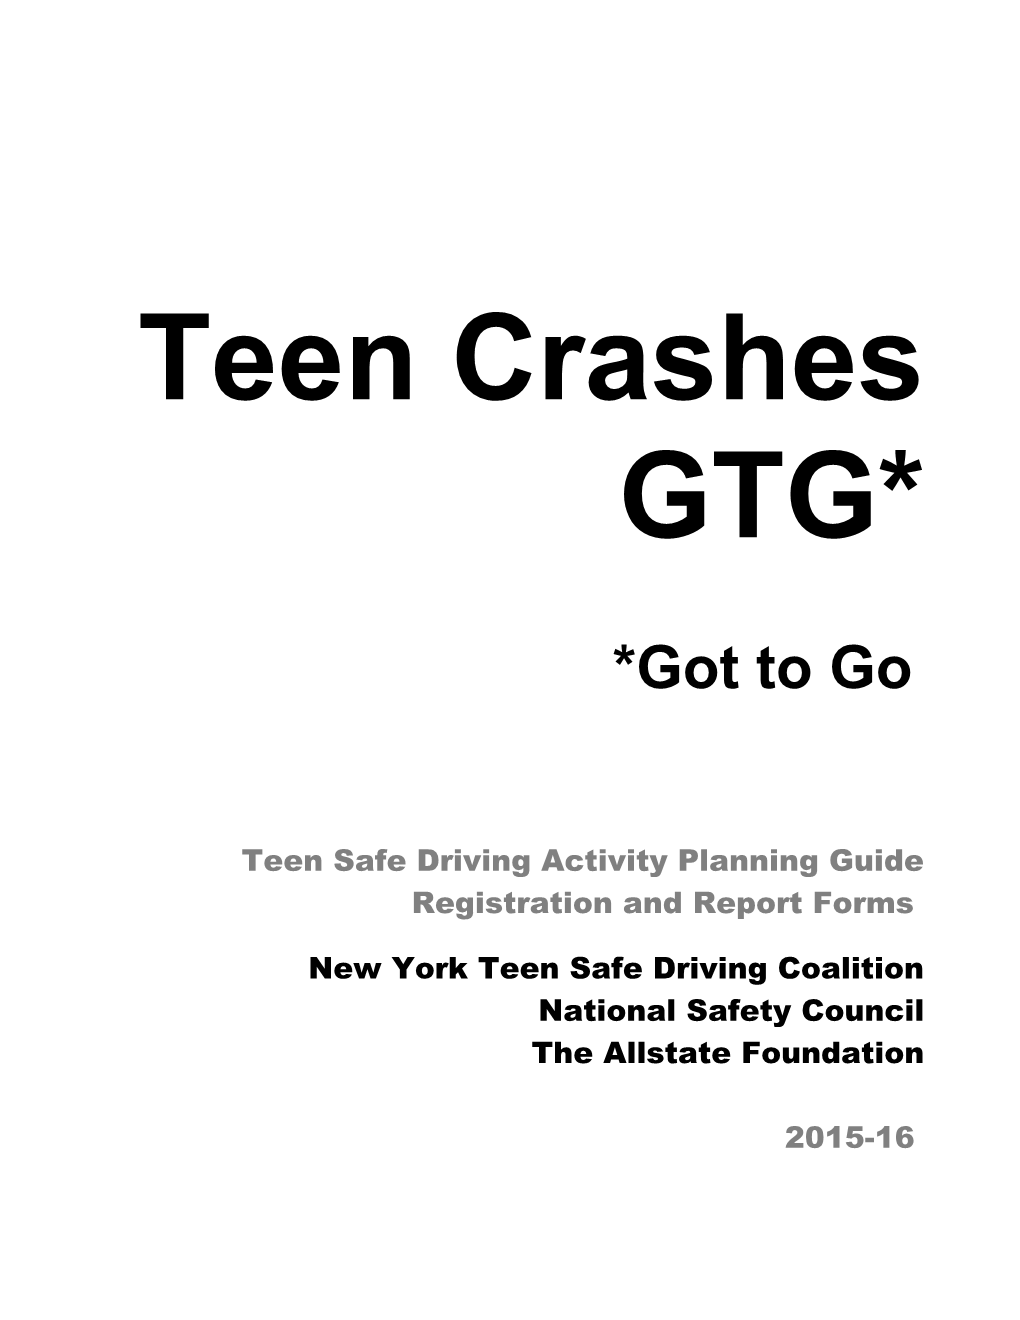 Teen Safe Driving Activity Planning Guide